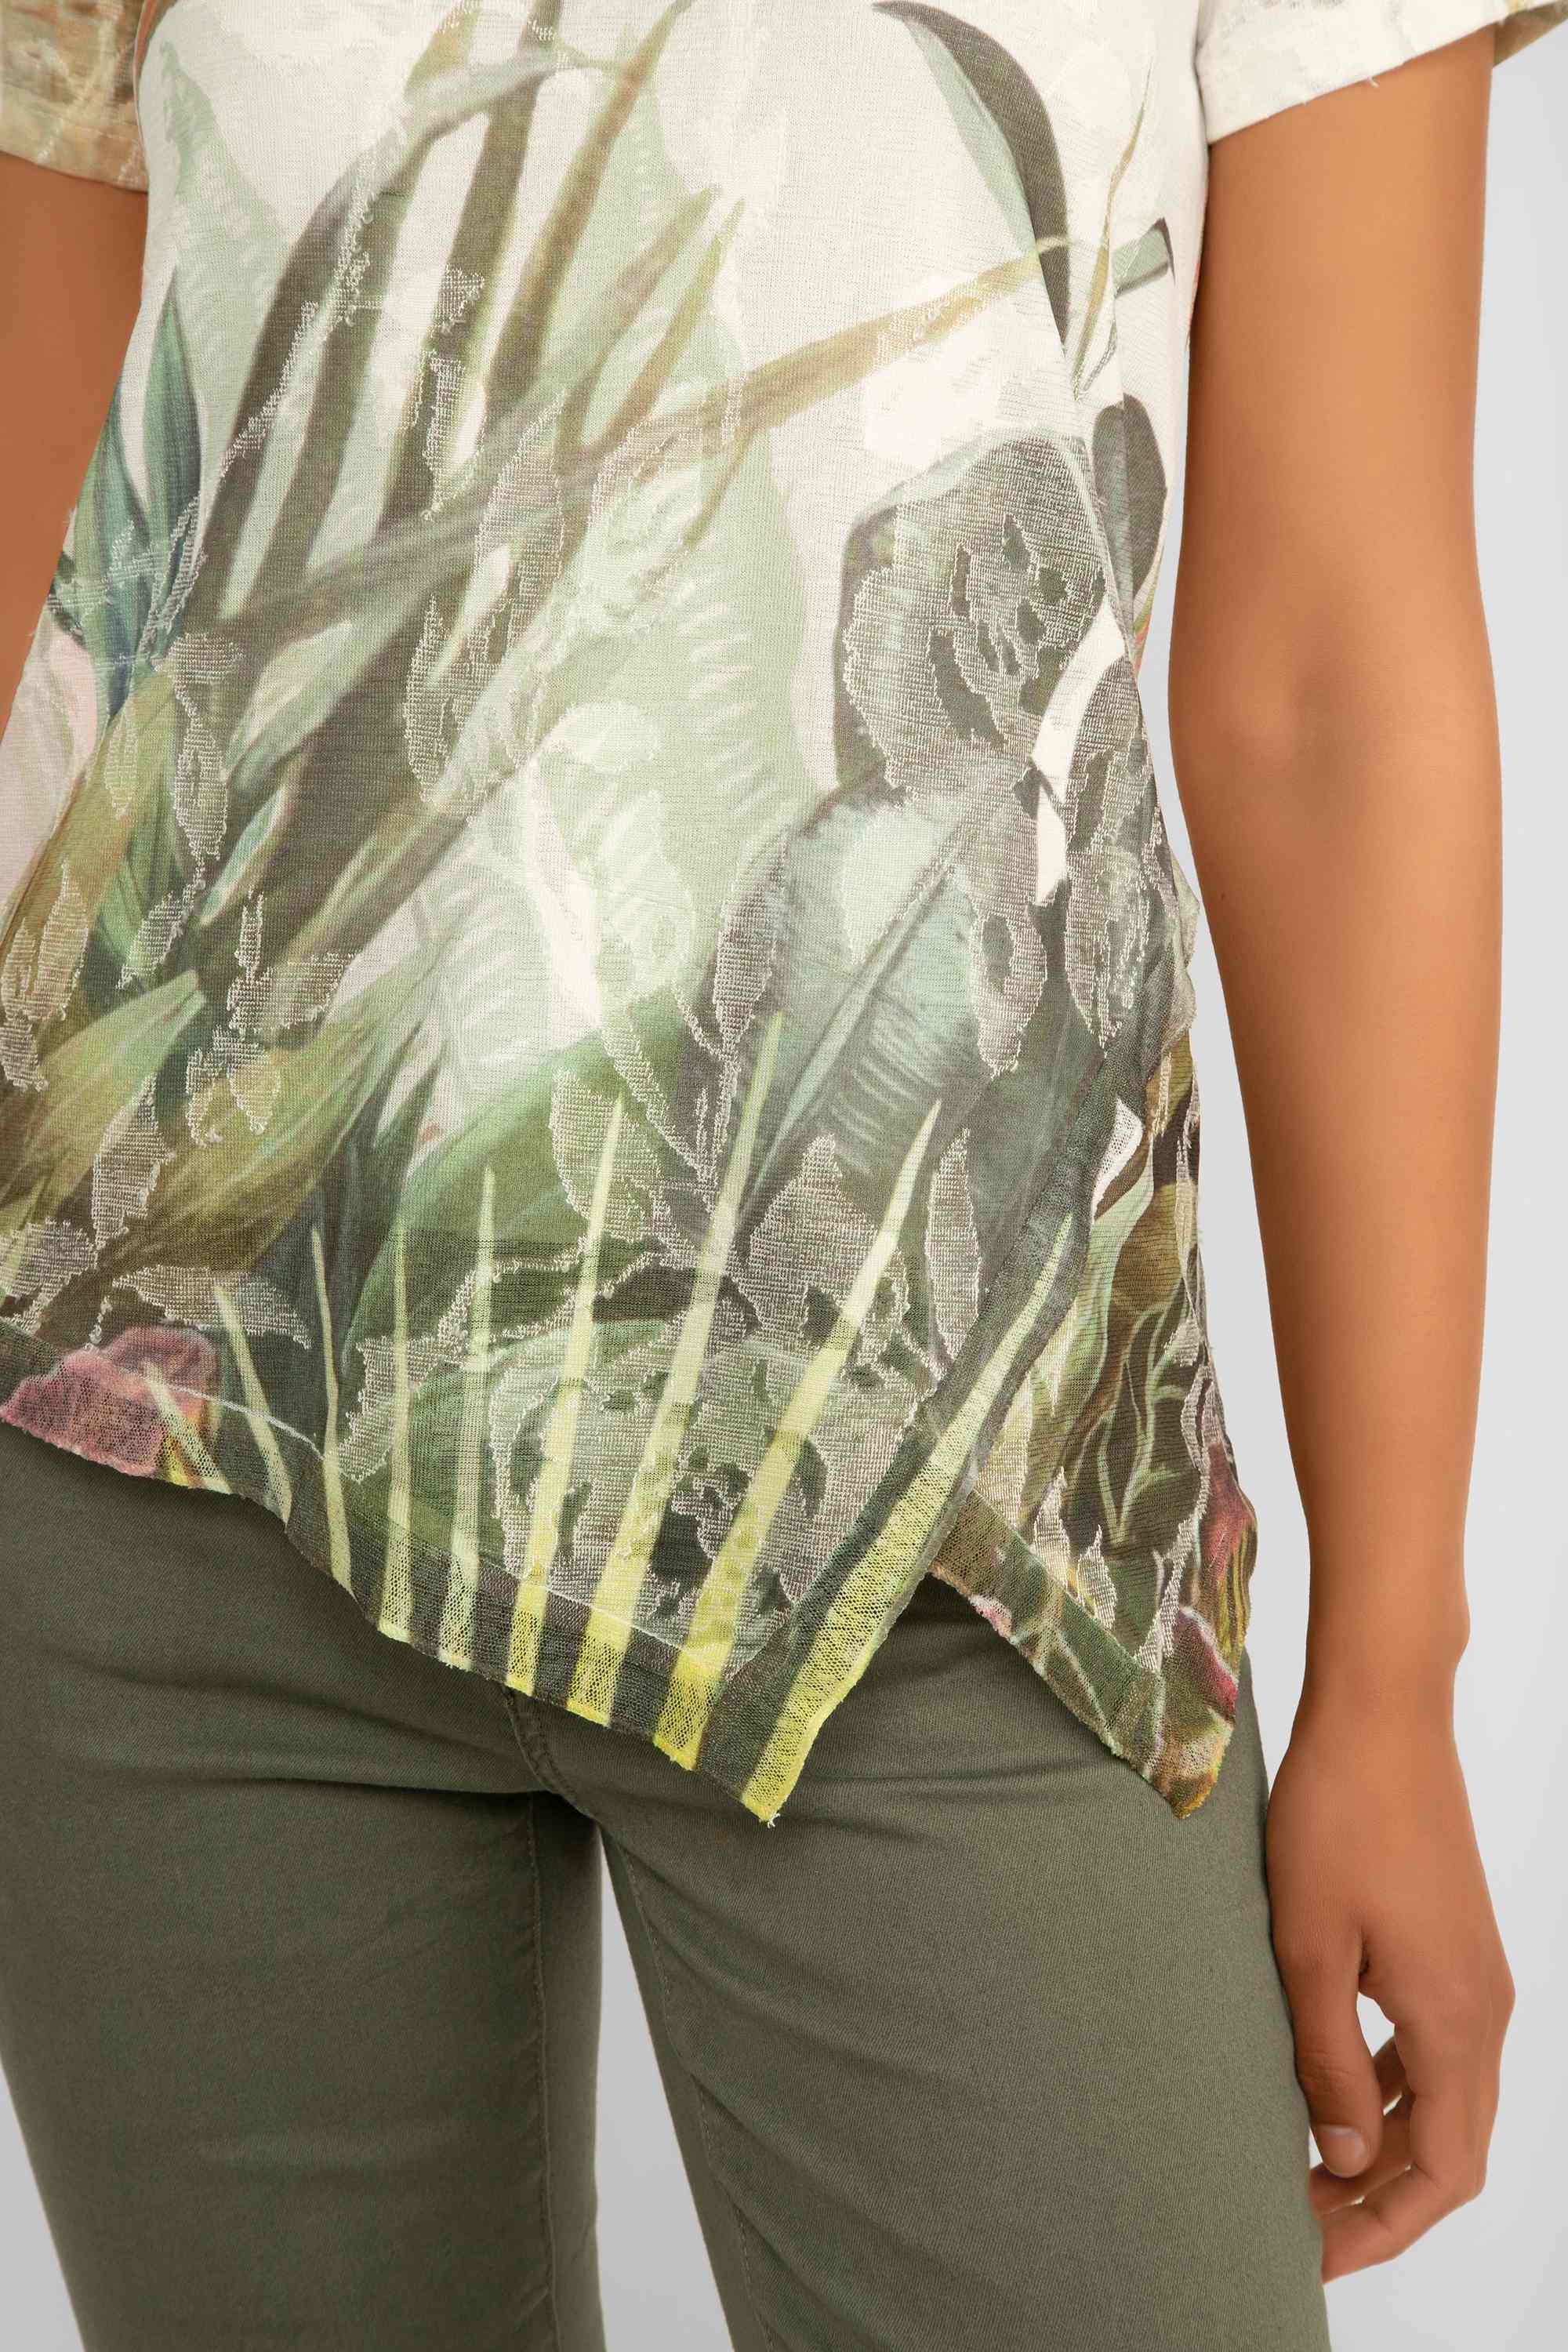 Picadilly (JC765SK) Women's Short Sleeve Asymmetrical Hem Top With an artichoke green foliage print over a cream background